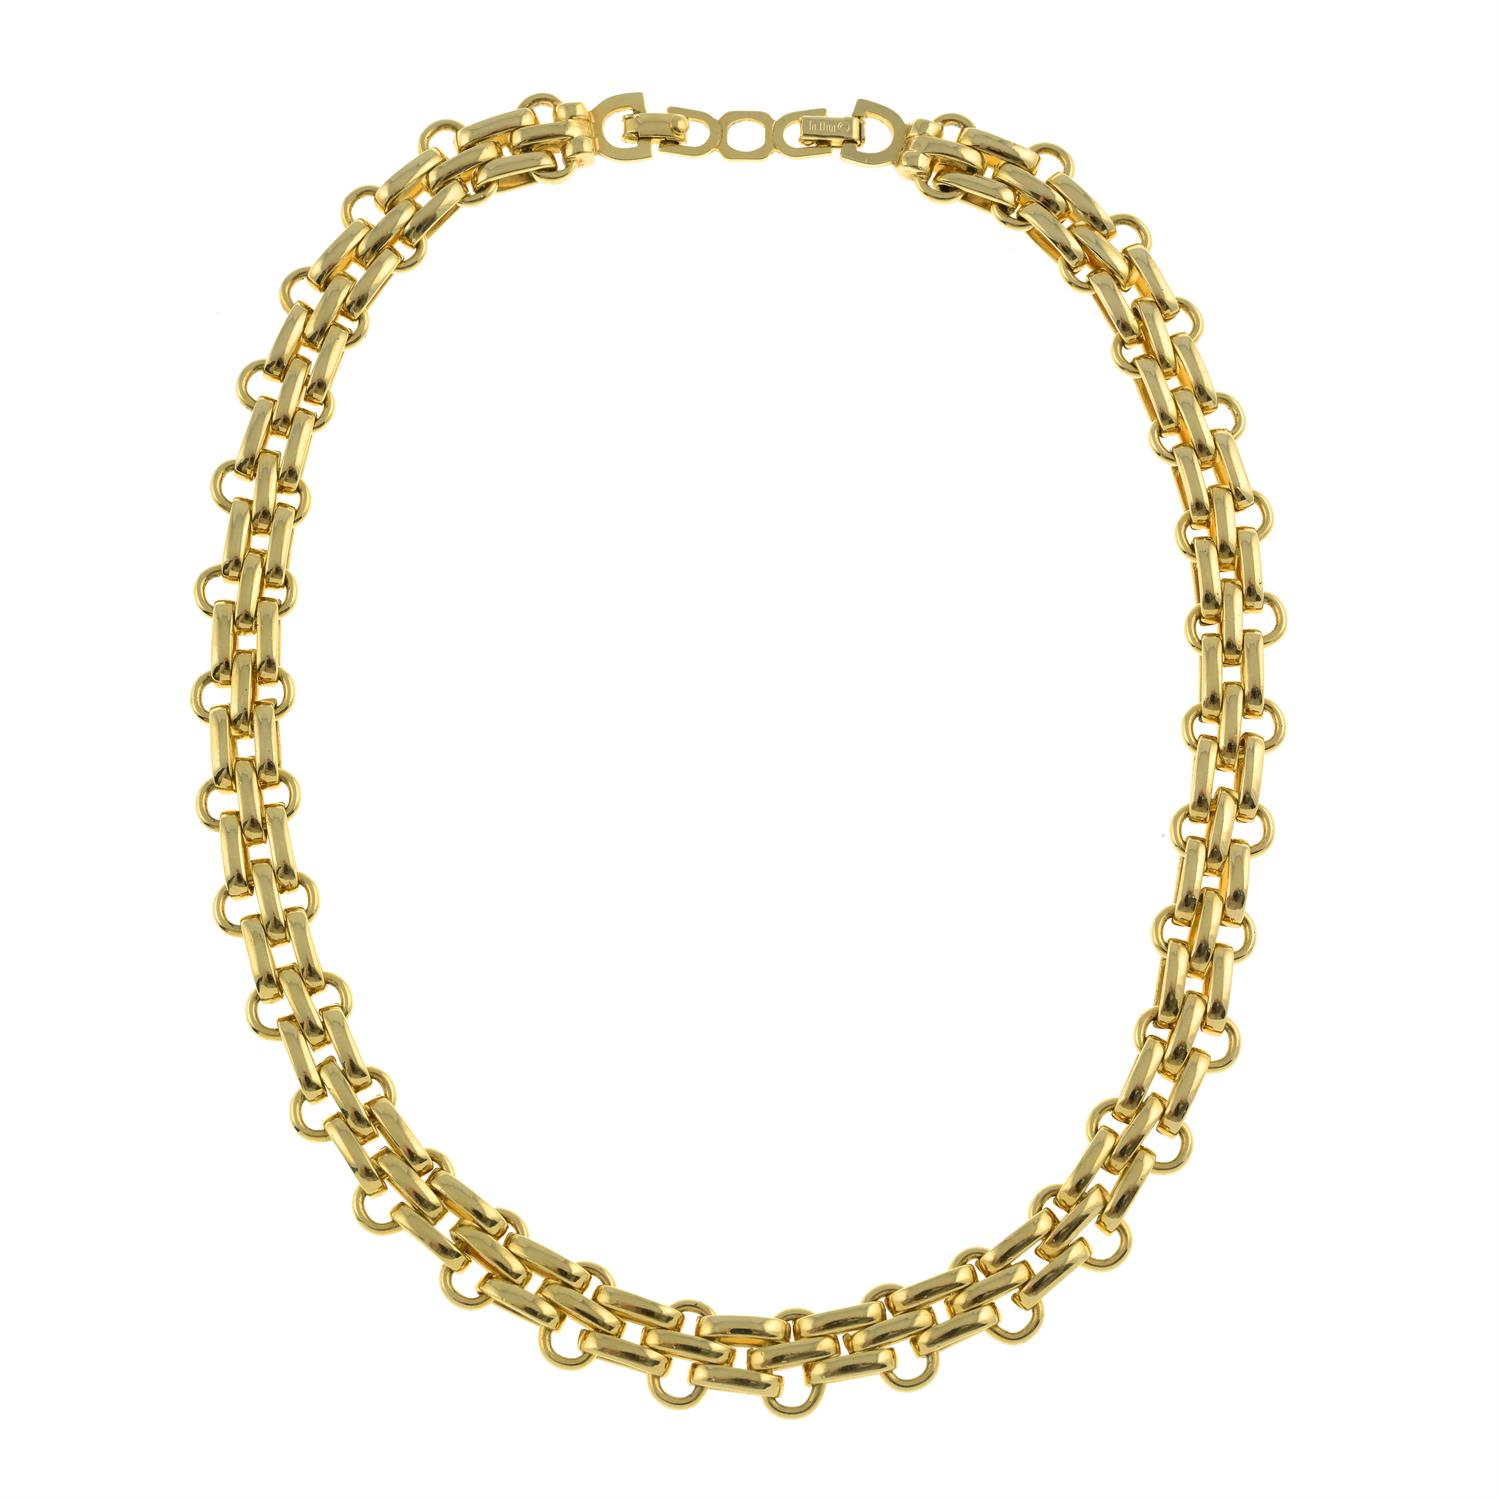 Christian Dior - necklace.